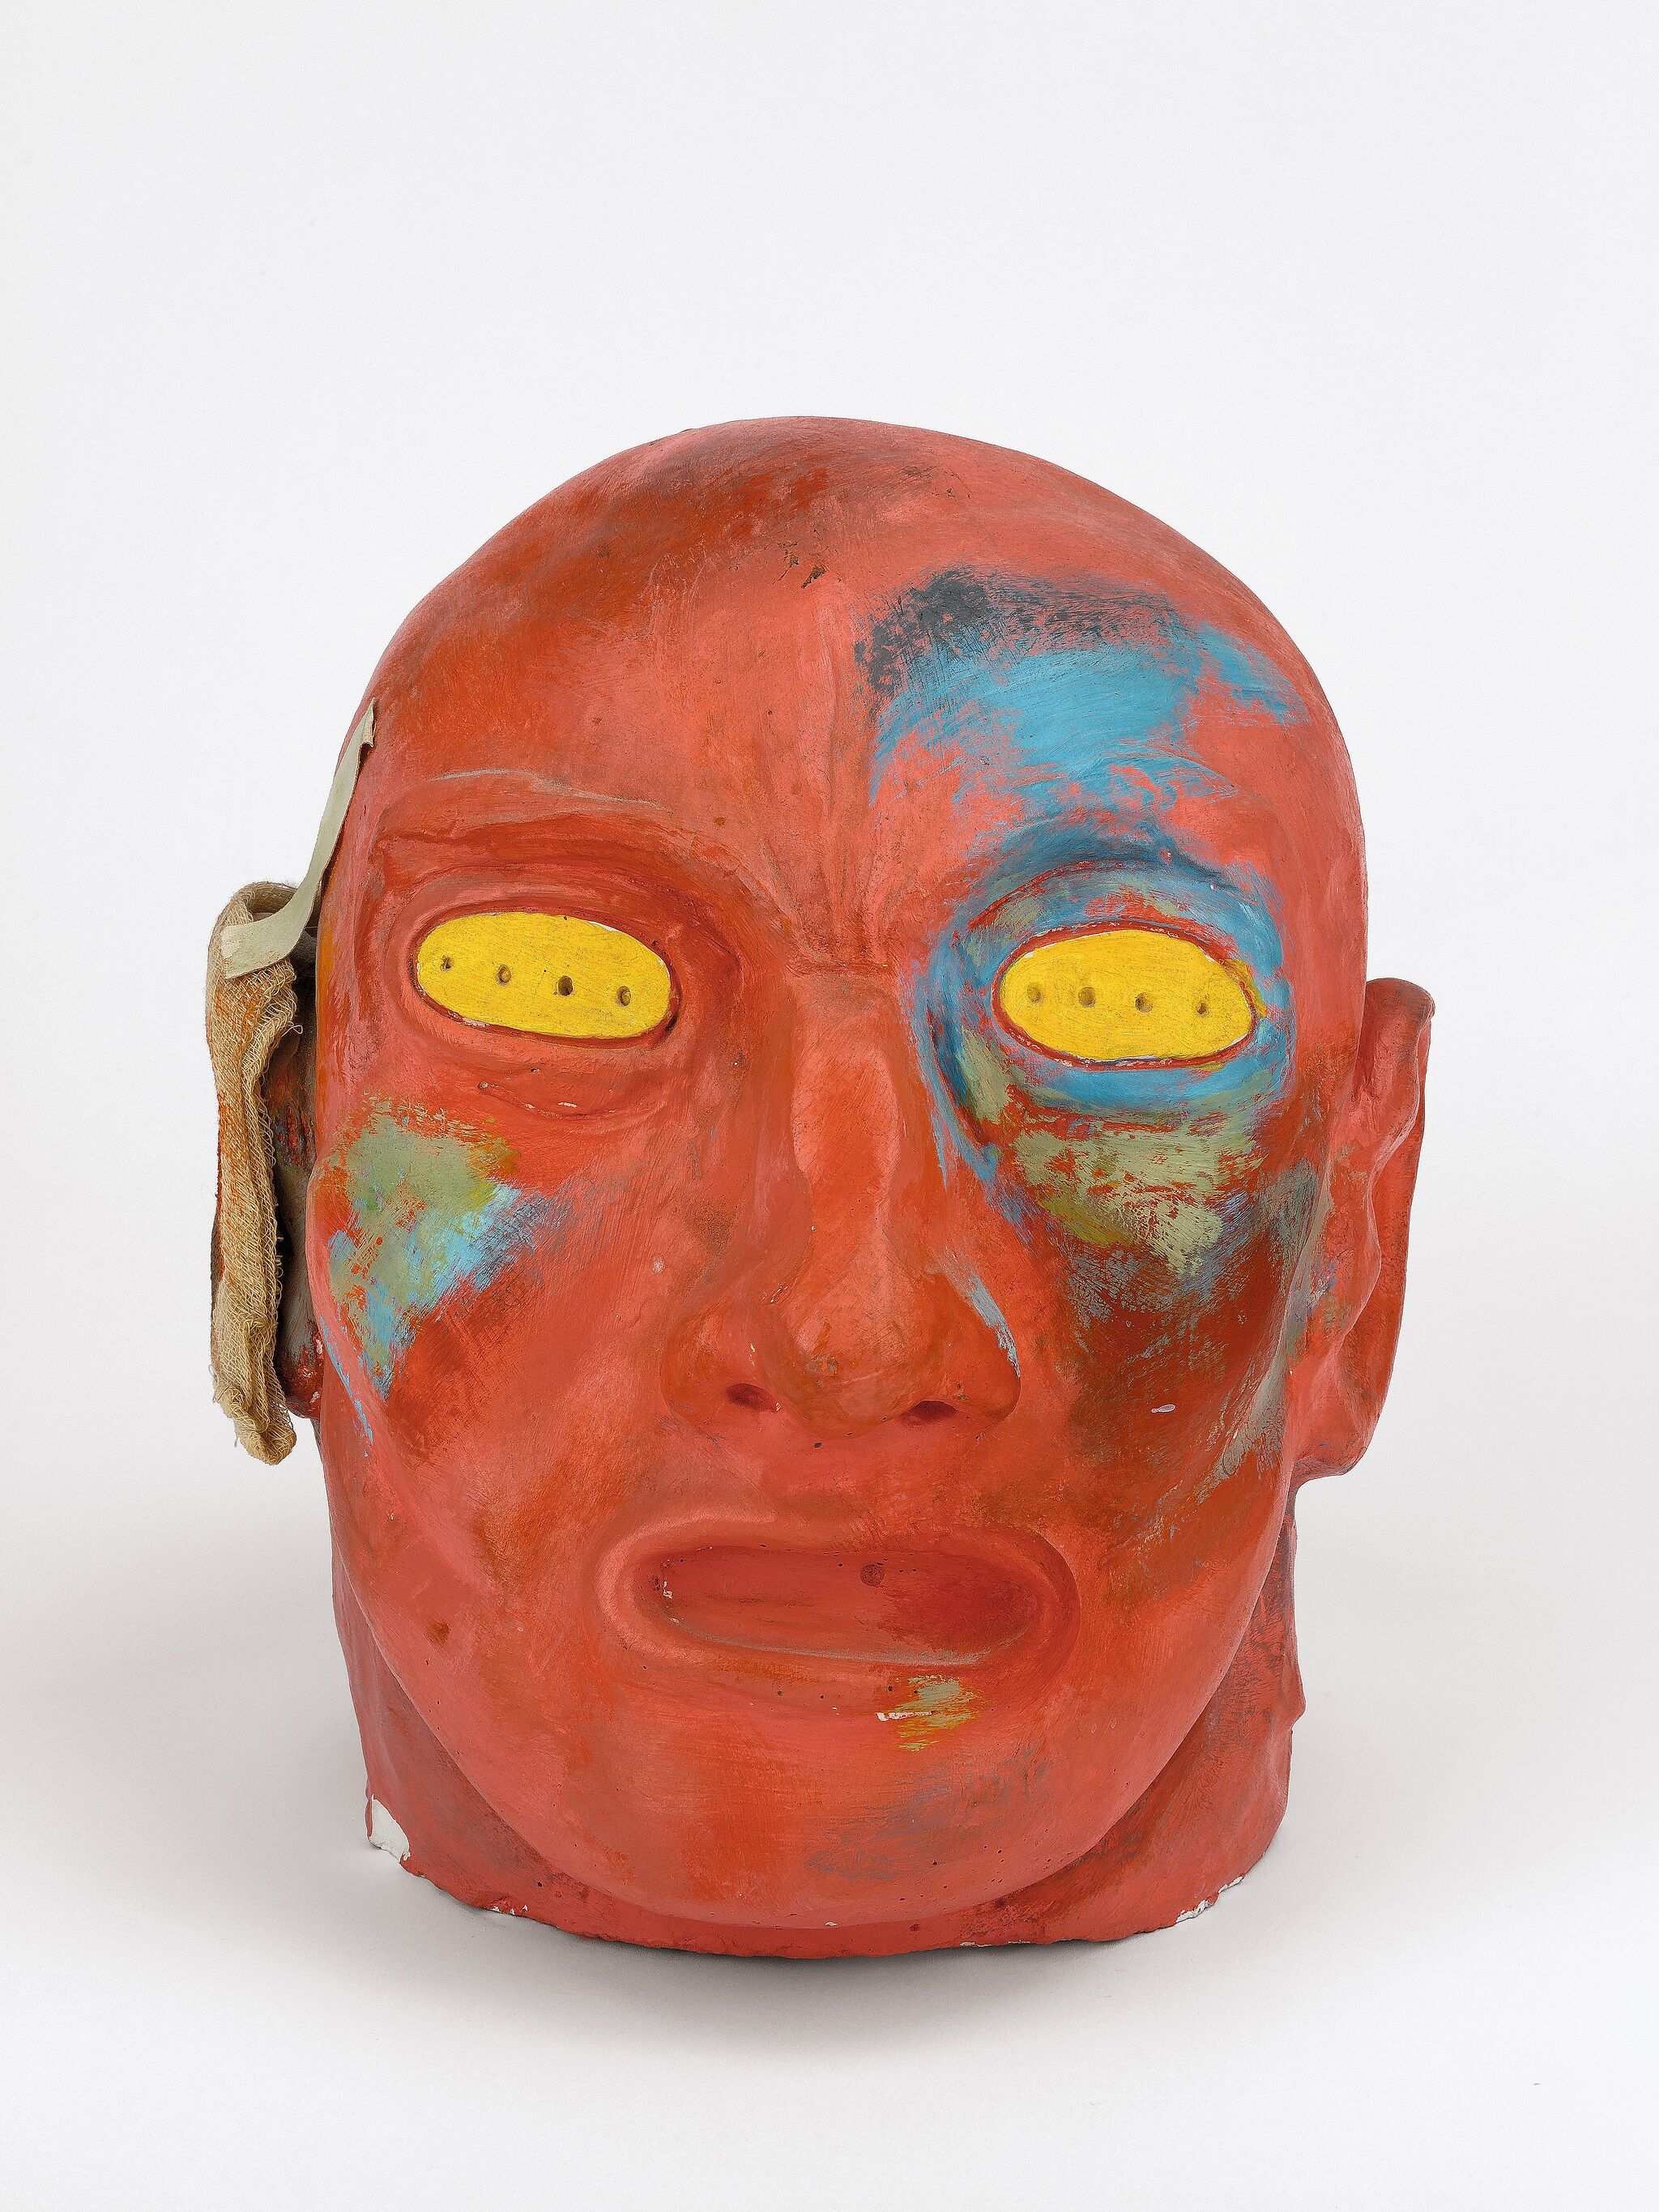 Head painted in colors with yellow eyes.